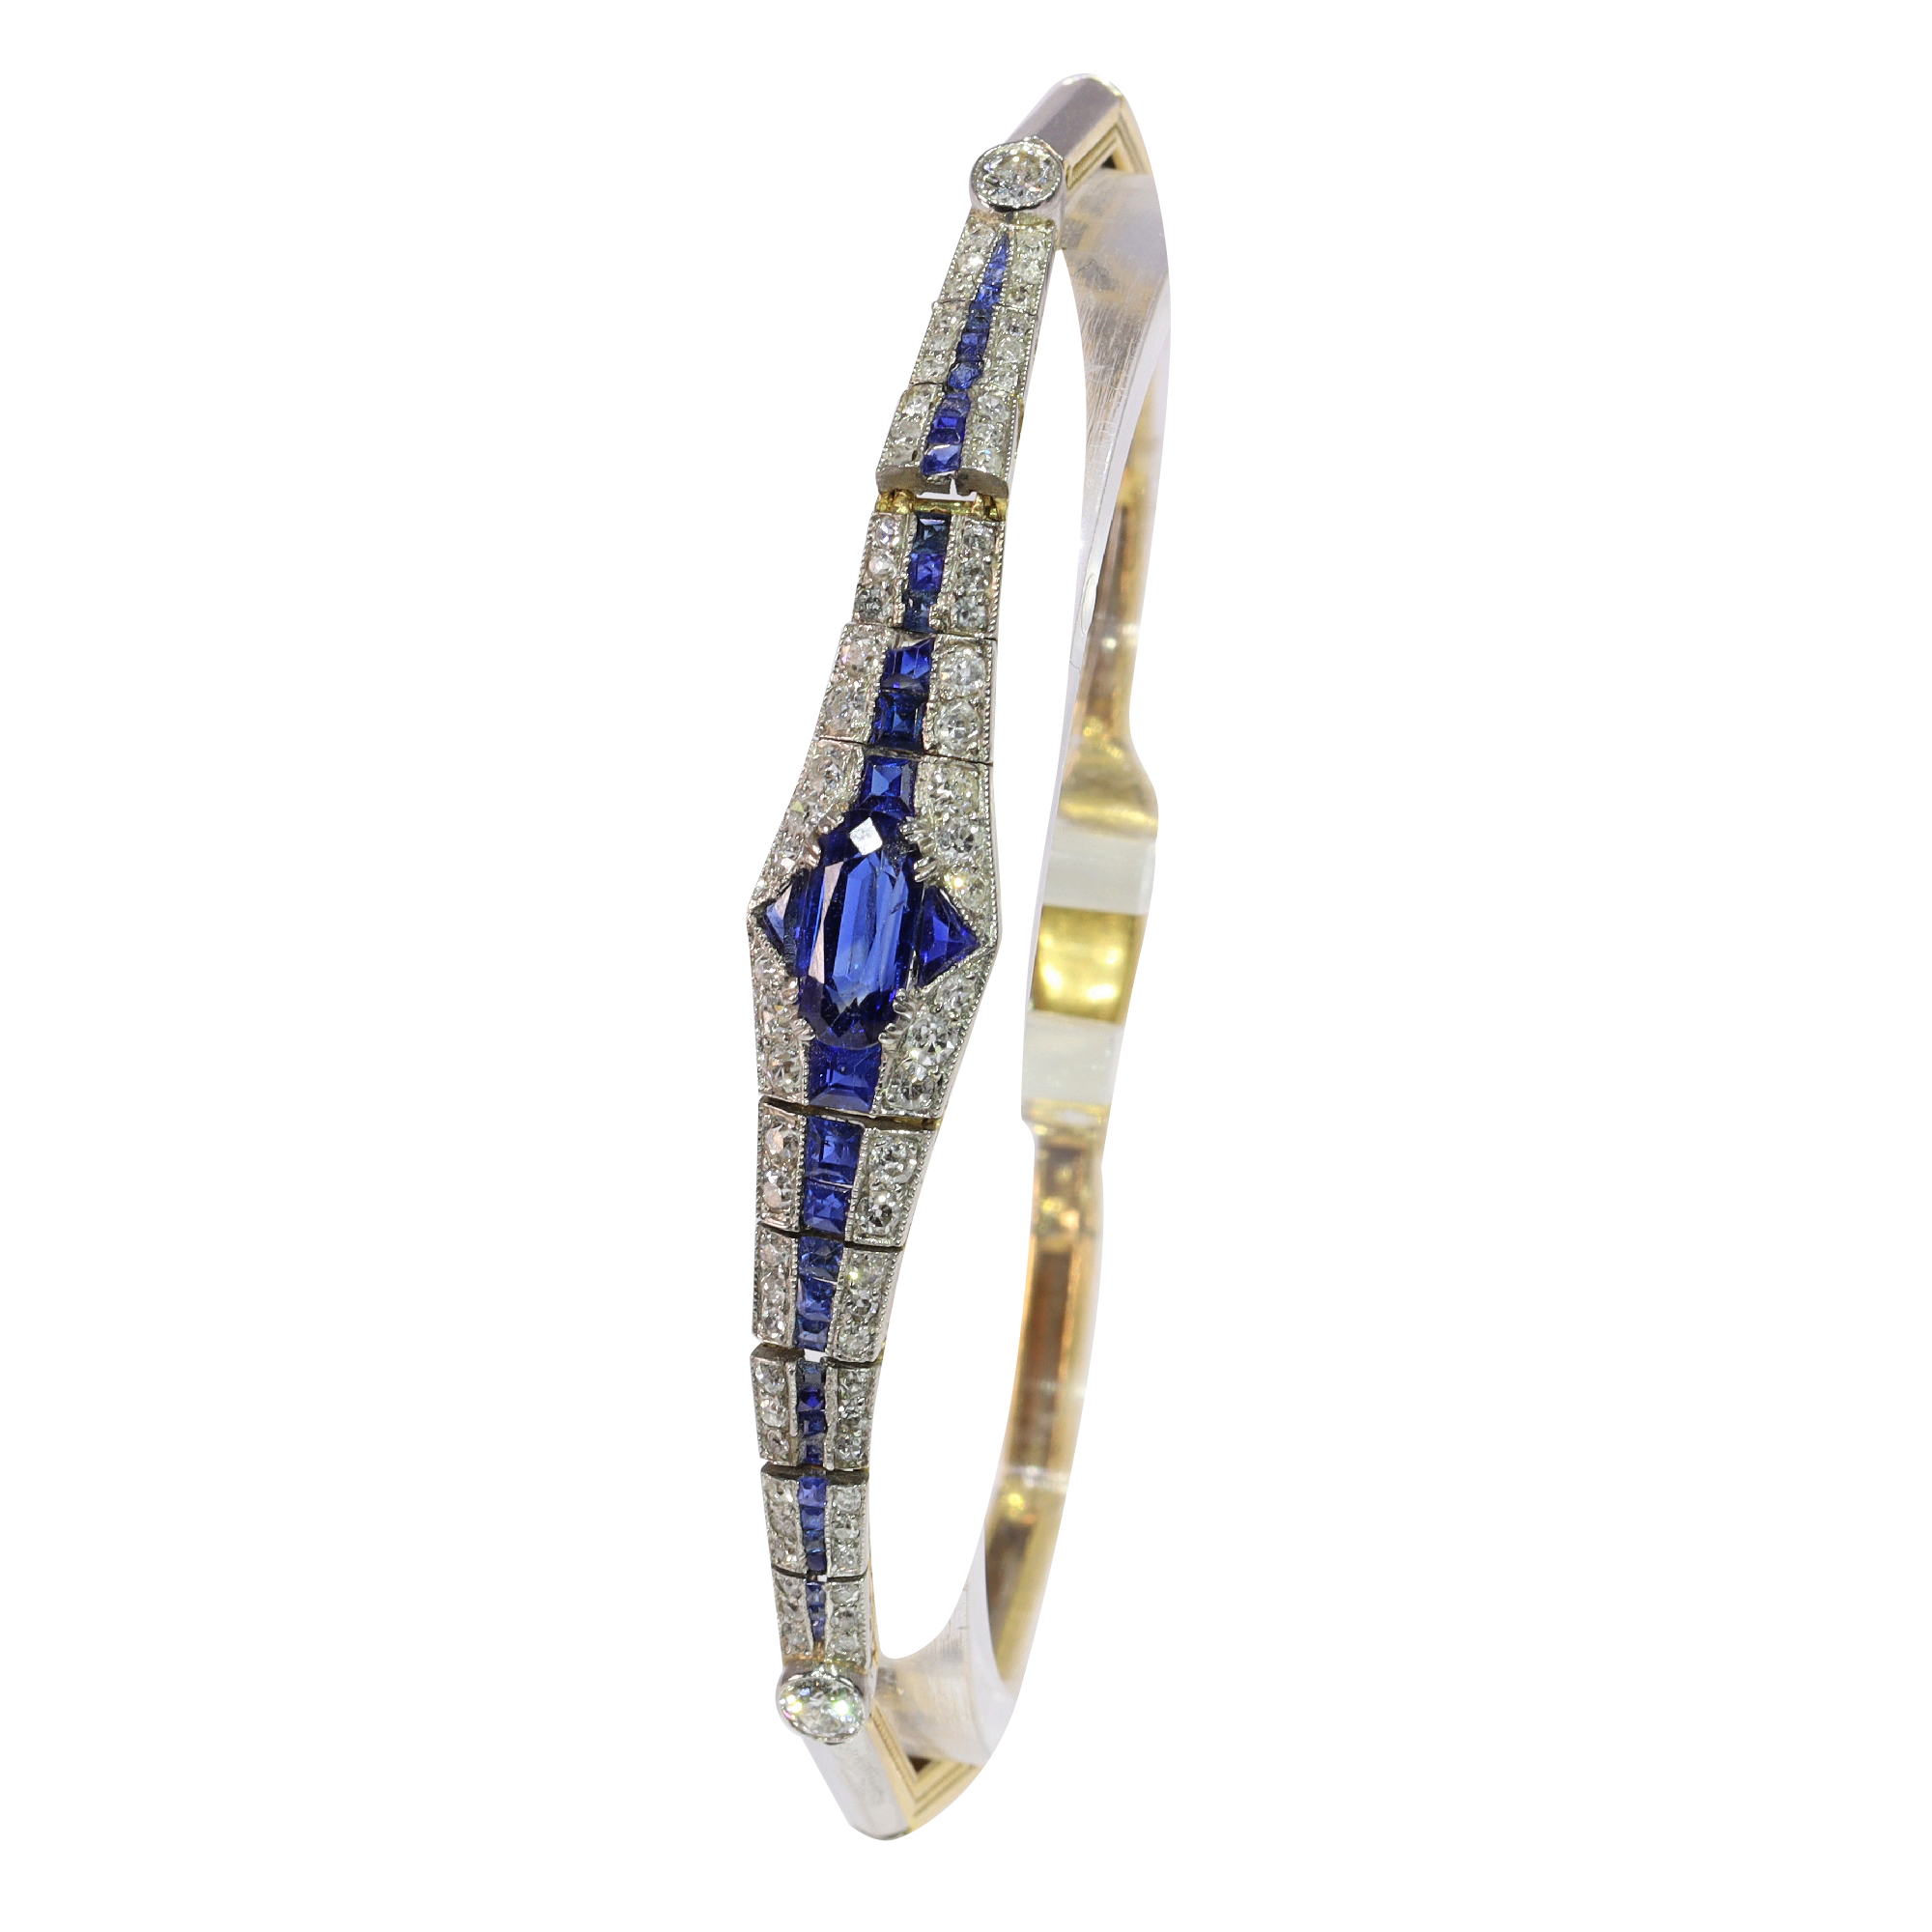 1920's Wrist Candy: A Fusion of Sapphire and Diamonds